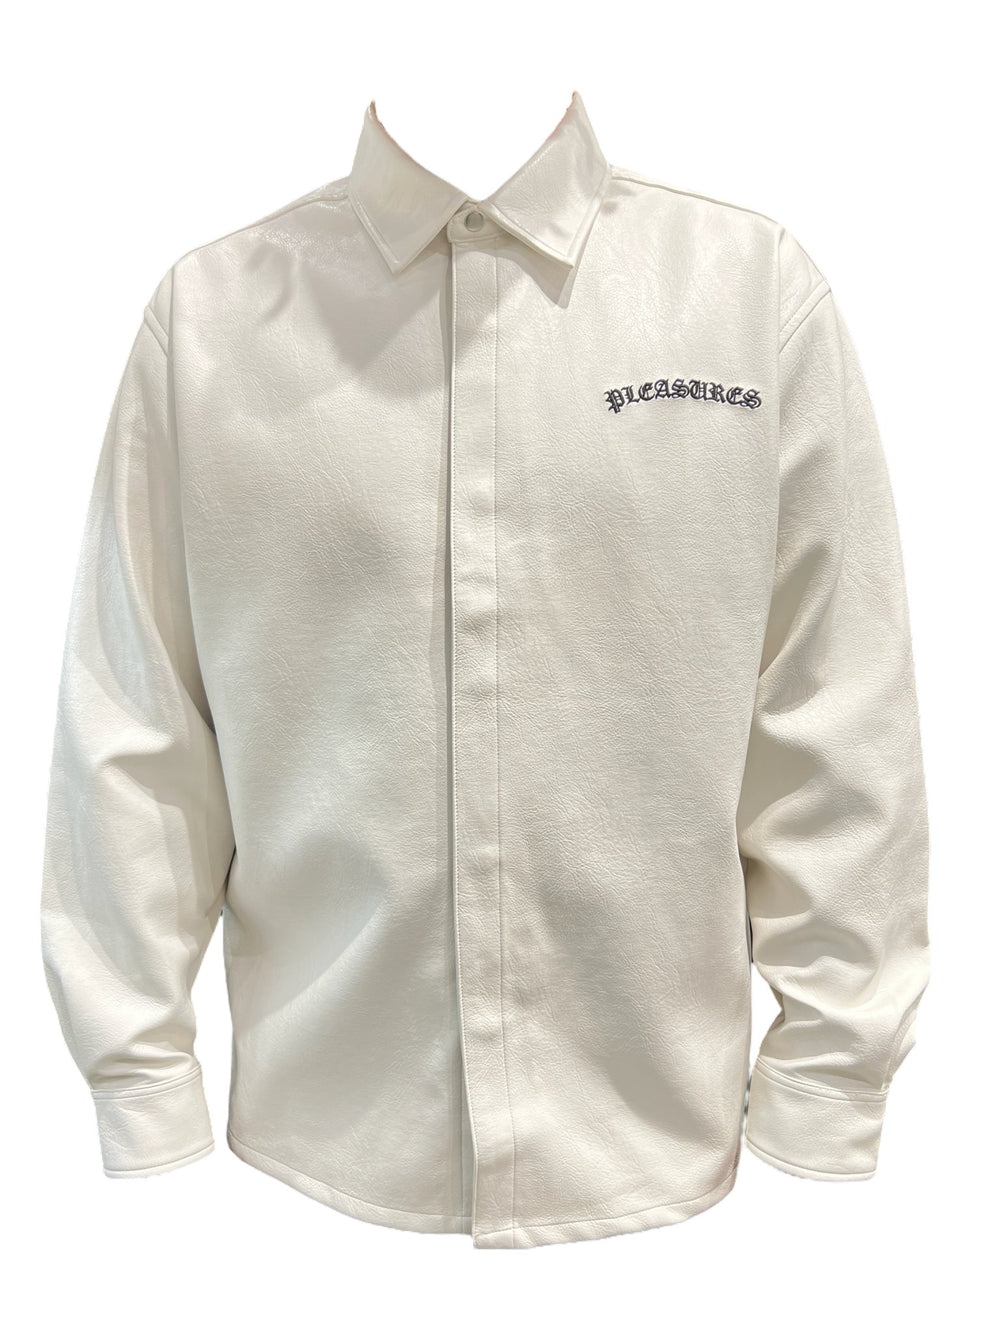 A white Pleasures Resonate Overshirt with an embroidered black logo on it.